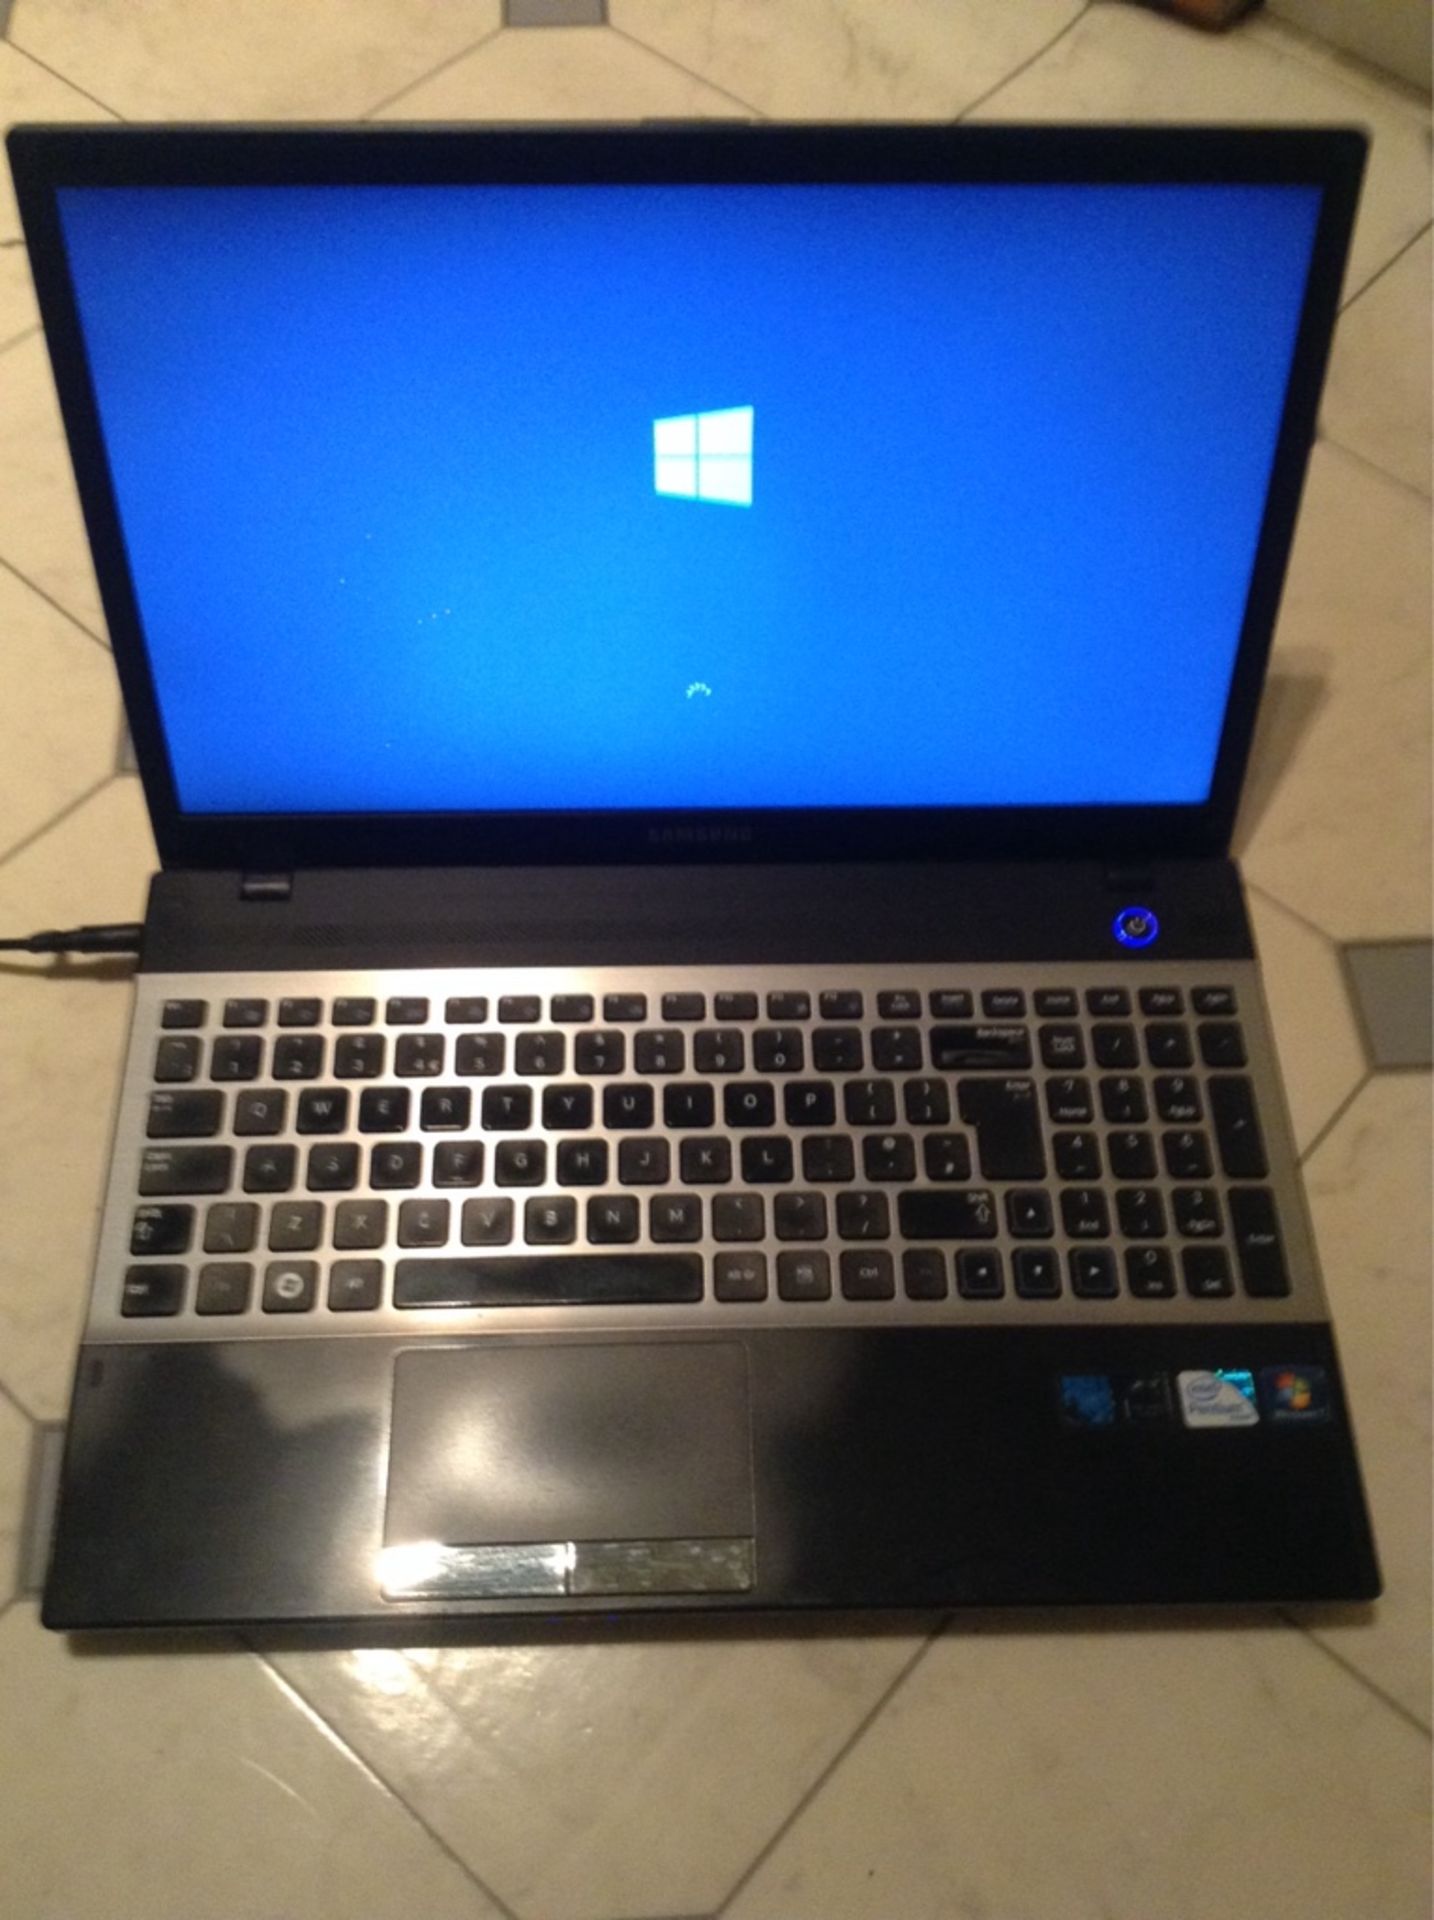 samsung notebook np300v5a 6/8gb windows 10 installed unregistered but problems loading needs wipe